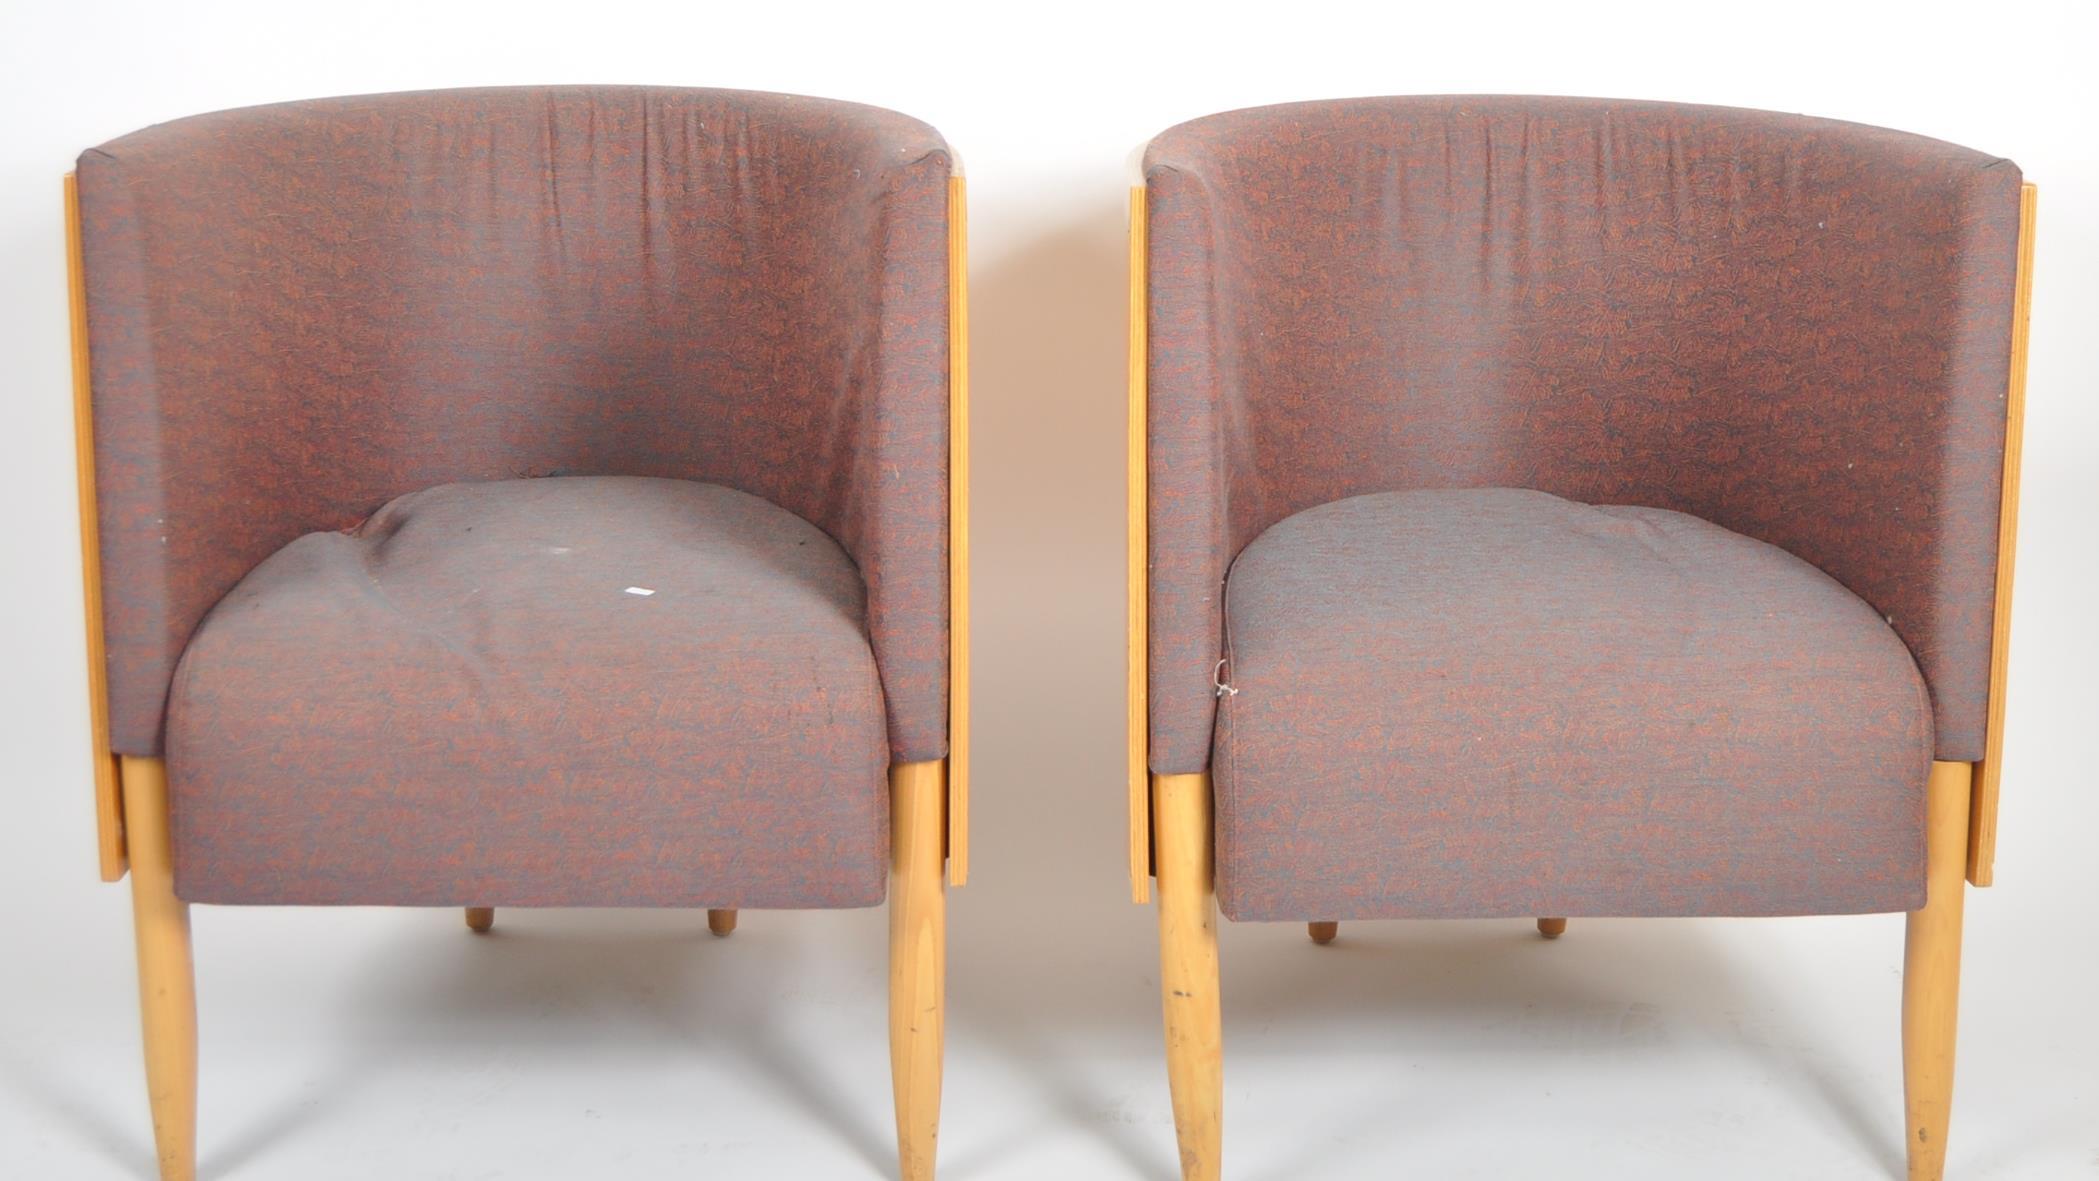 ALLERMUIR - PAIR OF EARLY 2000 BENTWOOD LOUNGE CHAIRS - Image 2 of 5